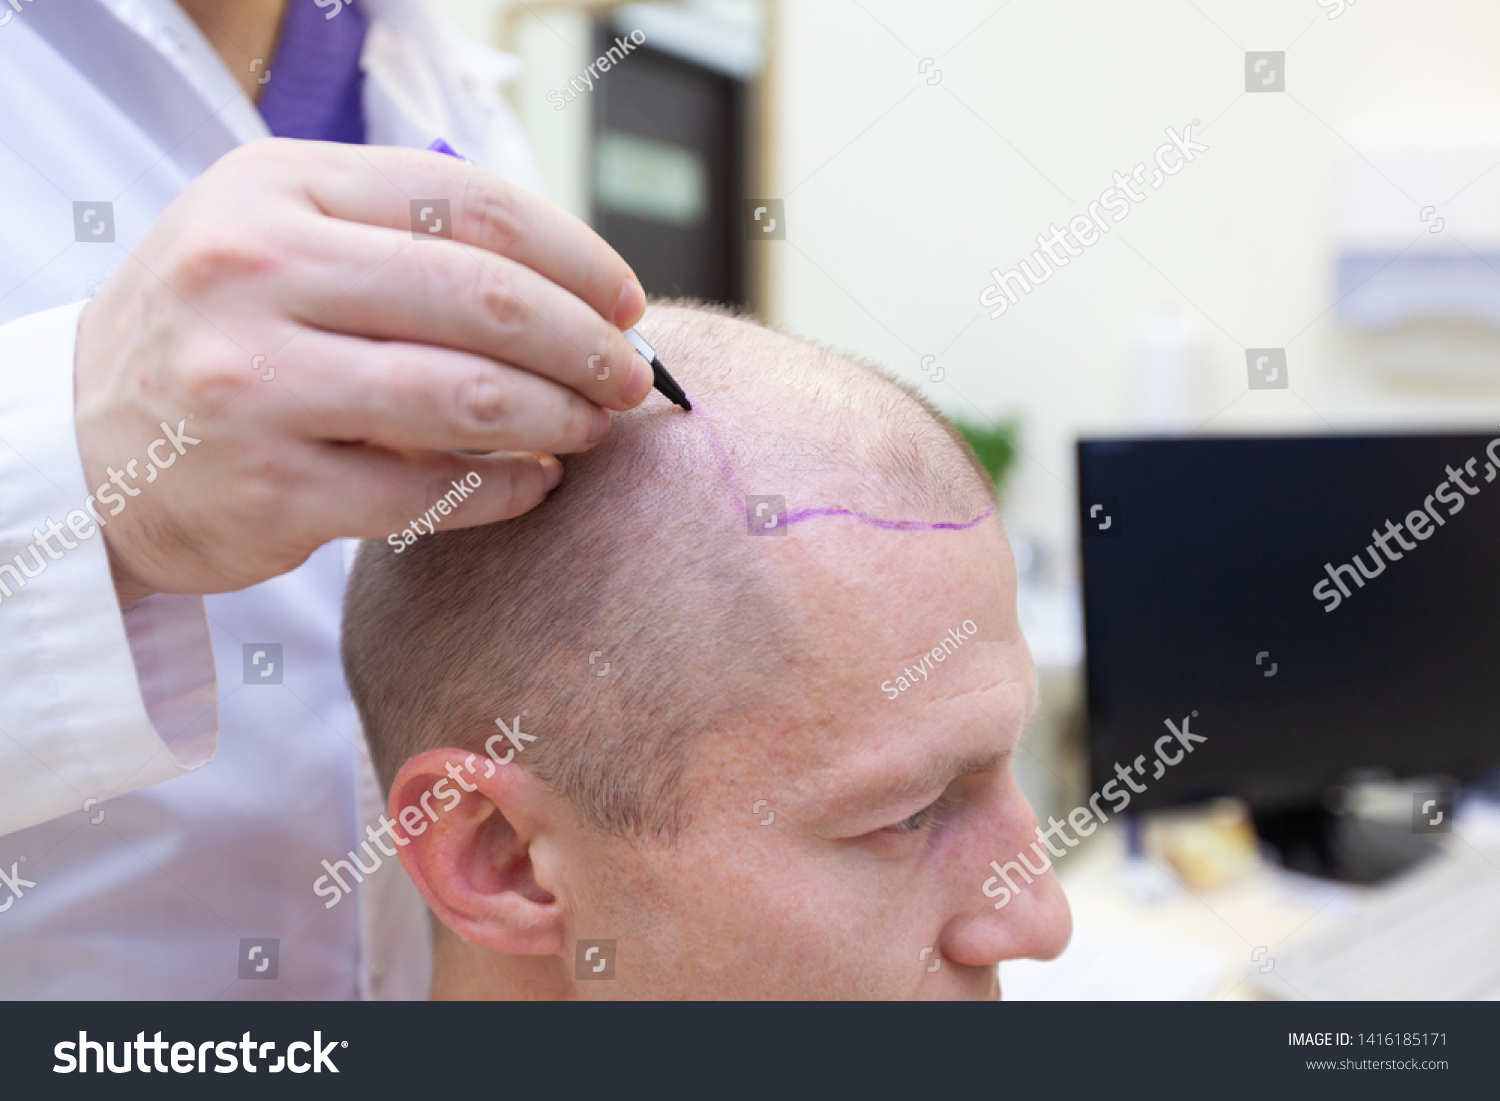 Baldness treatment. Patient suffering from hair loss in consultation with a doctor. Preparation for hair transplant surgery. The line marking the growth of hair. The patient controls the marking in #1416185171